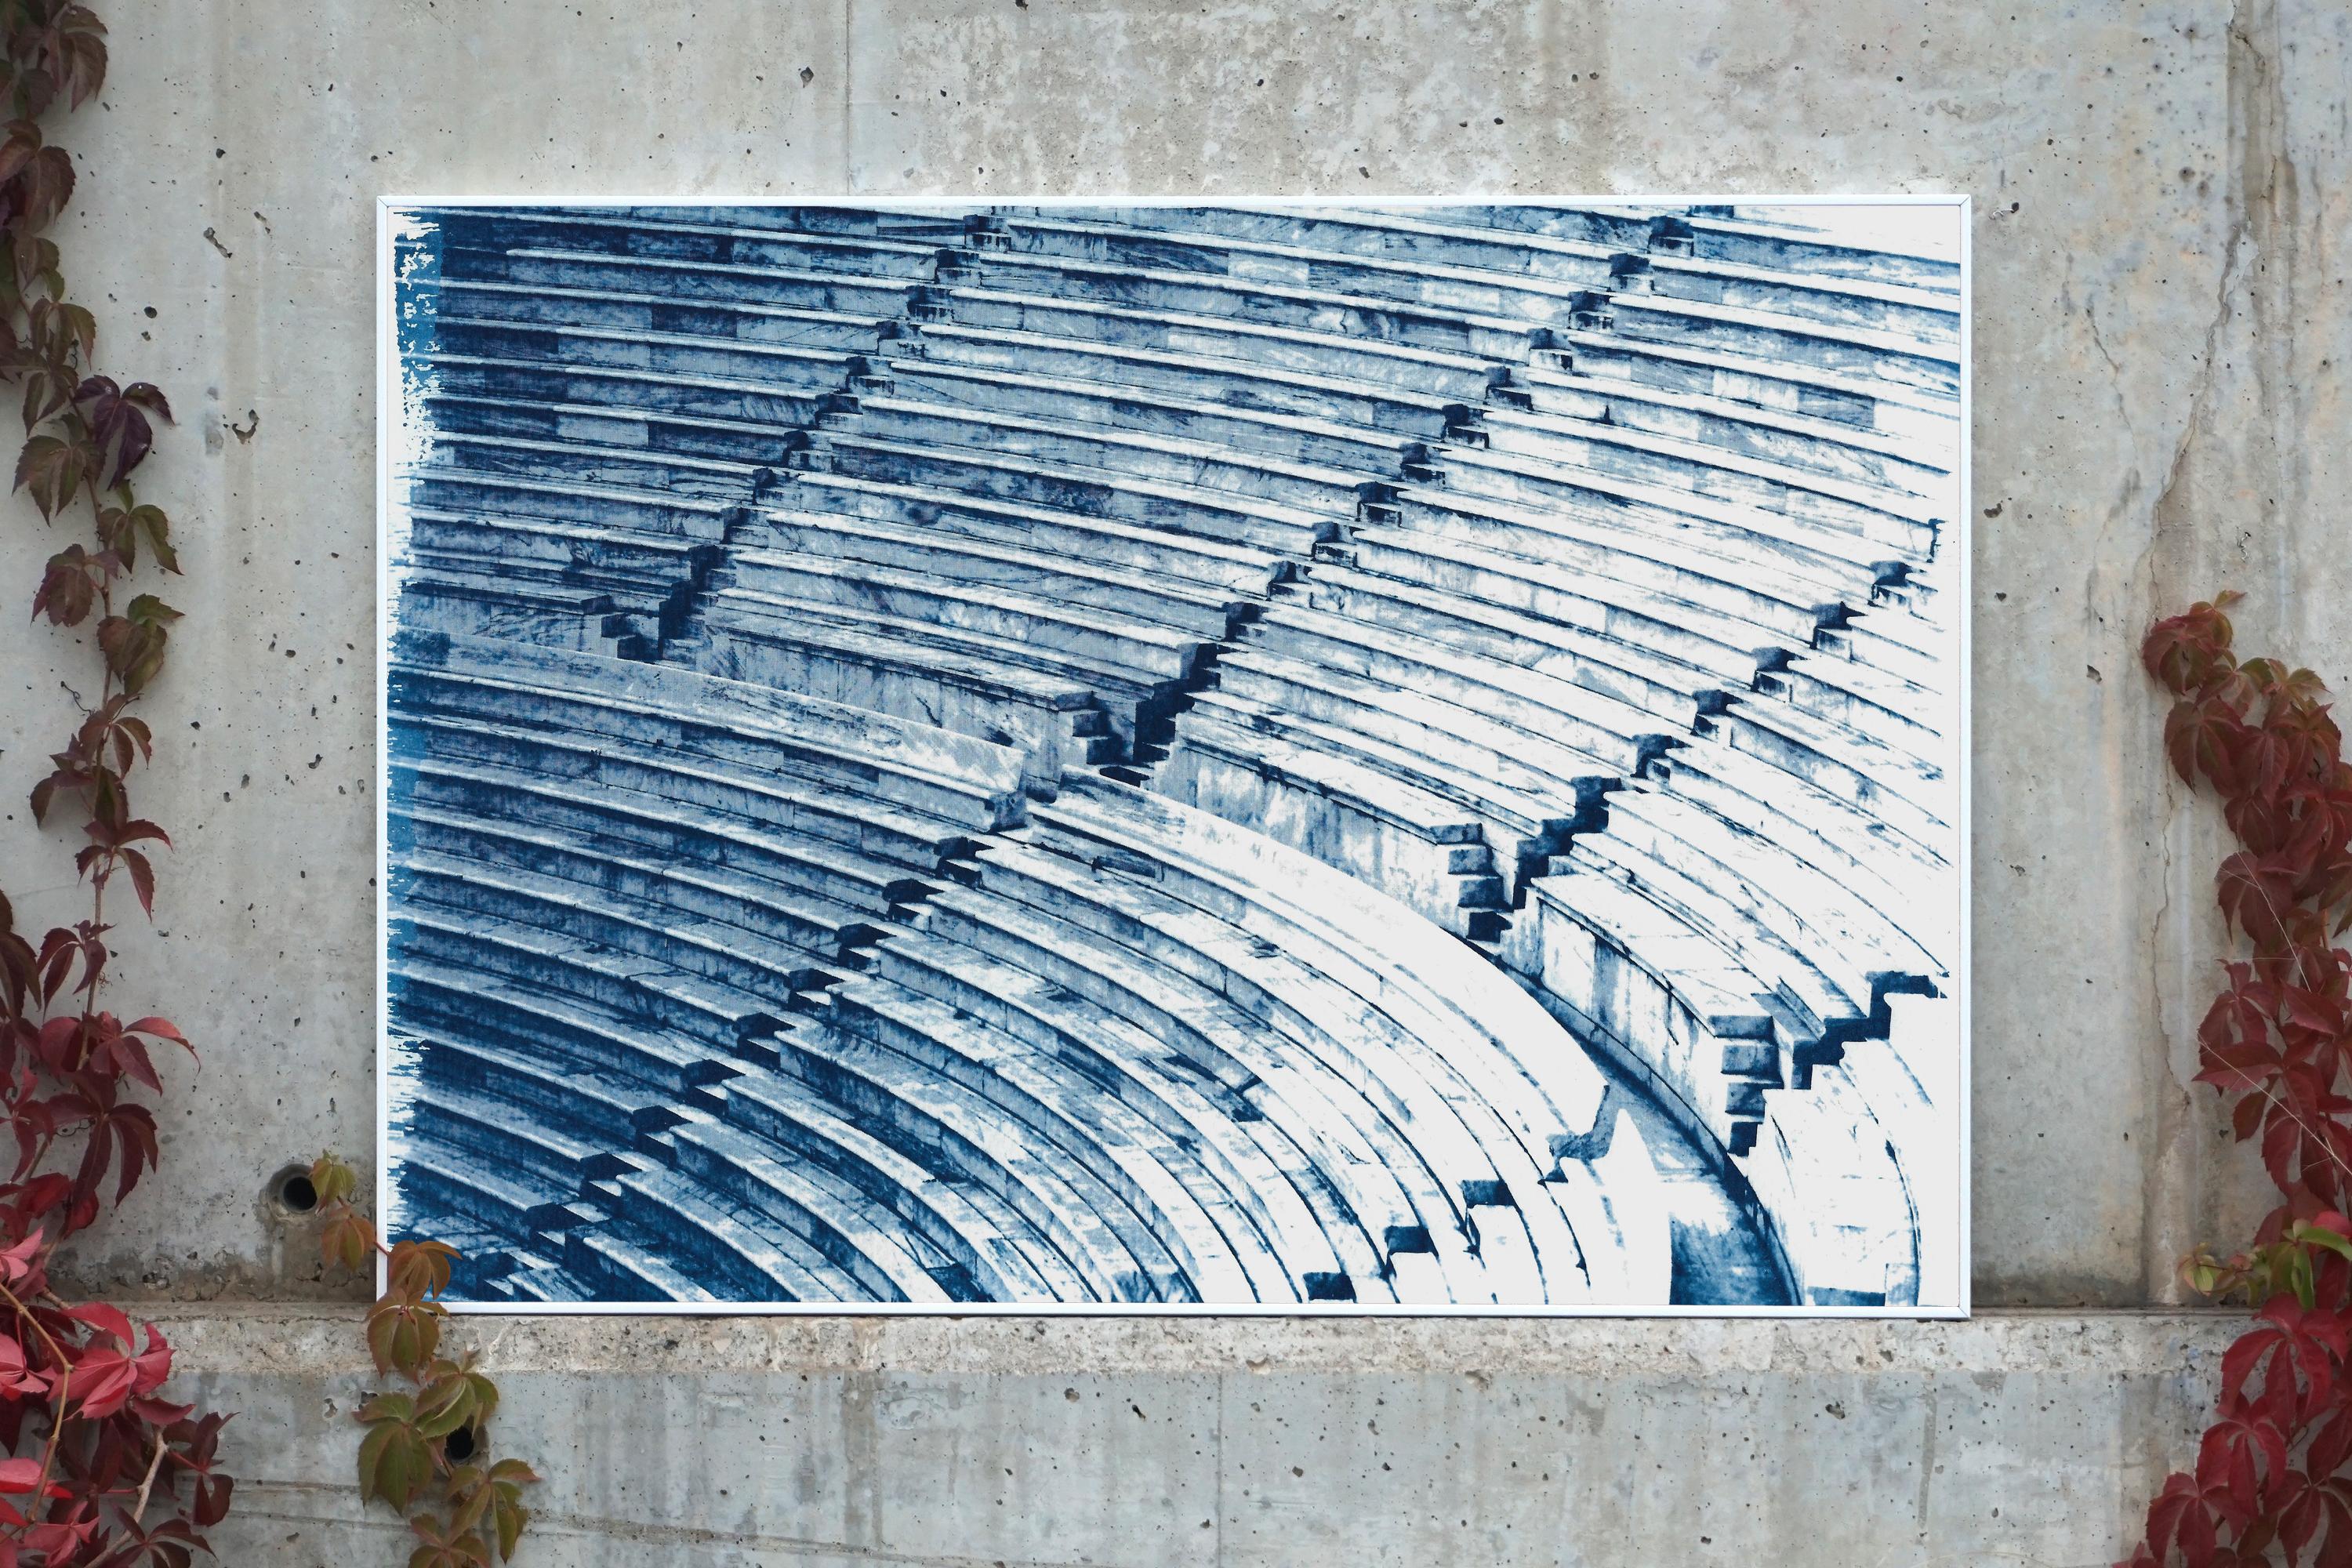 Diptych of Ancient Theatre, Multi-panel Cyanotype, Greek and Roman Architecture 1